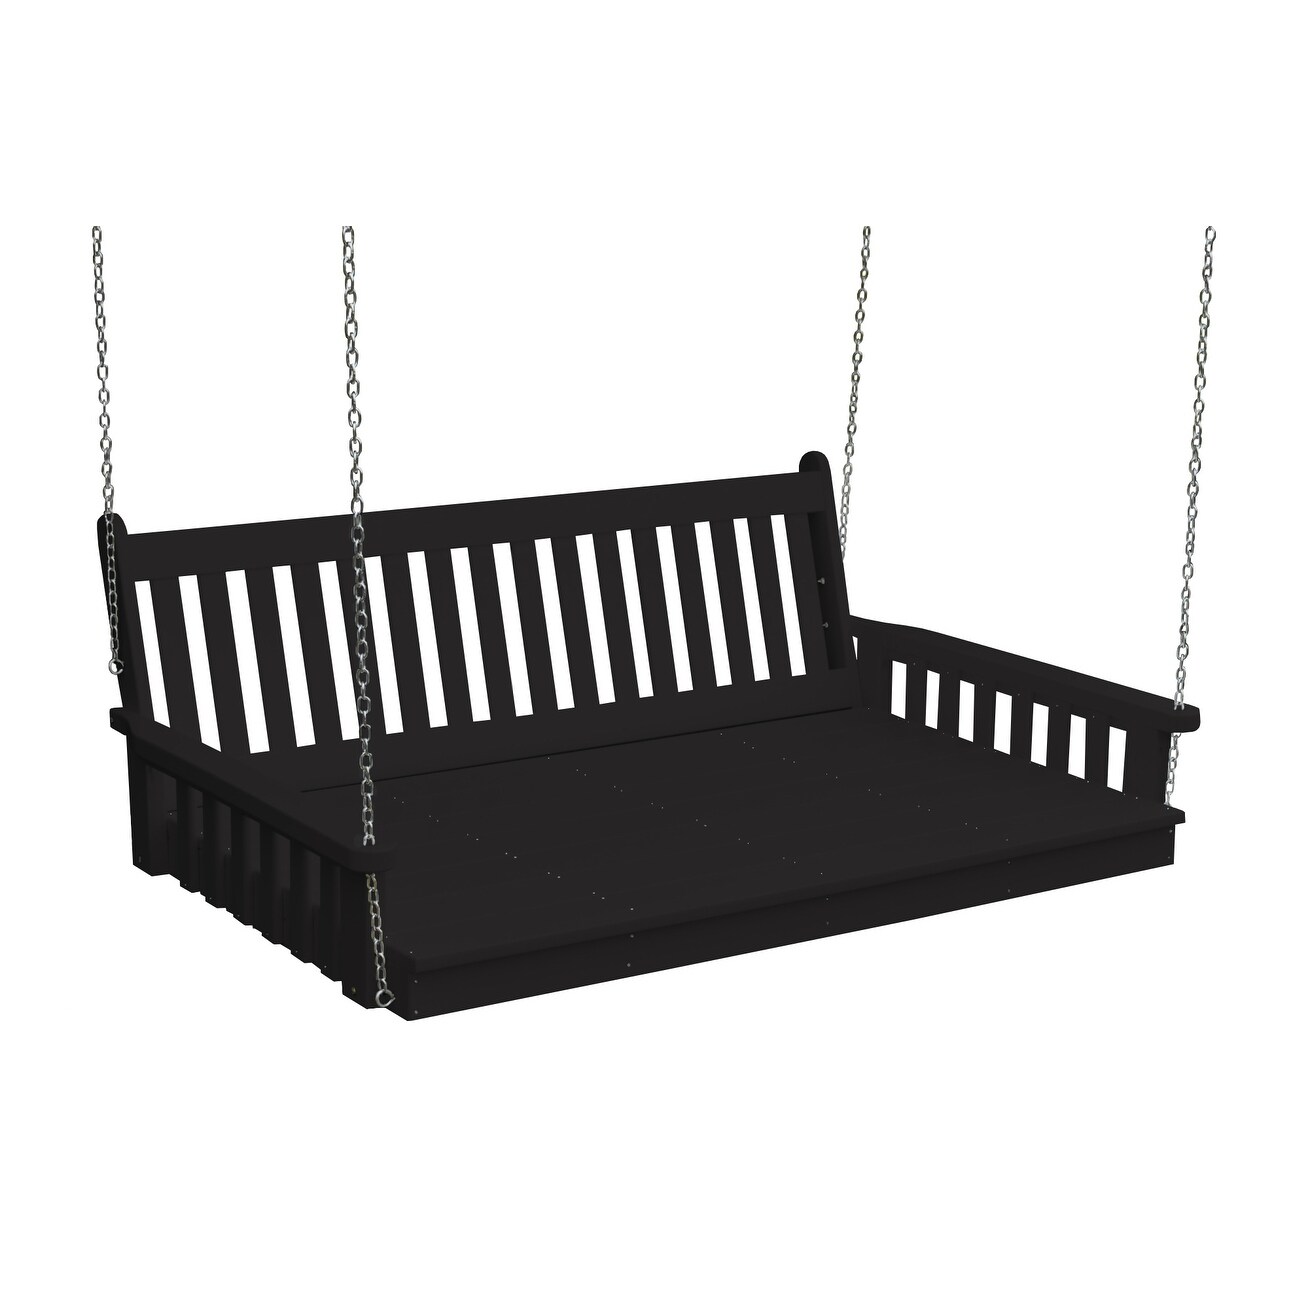 Kunkle Holdings LLC 75 in. Traditional English Swing Bed in Poly Lumber